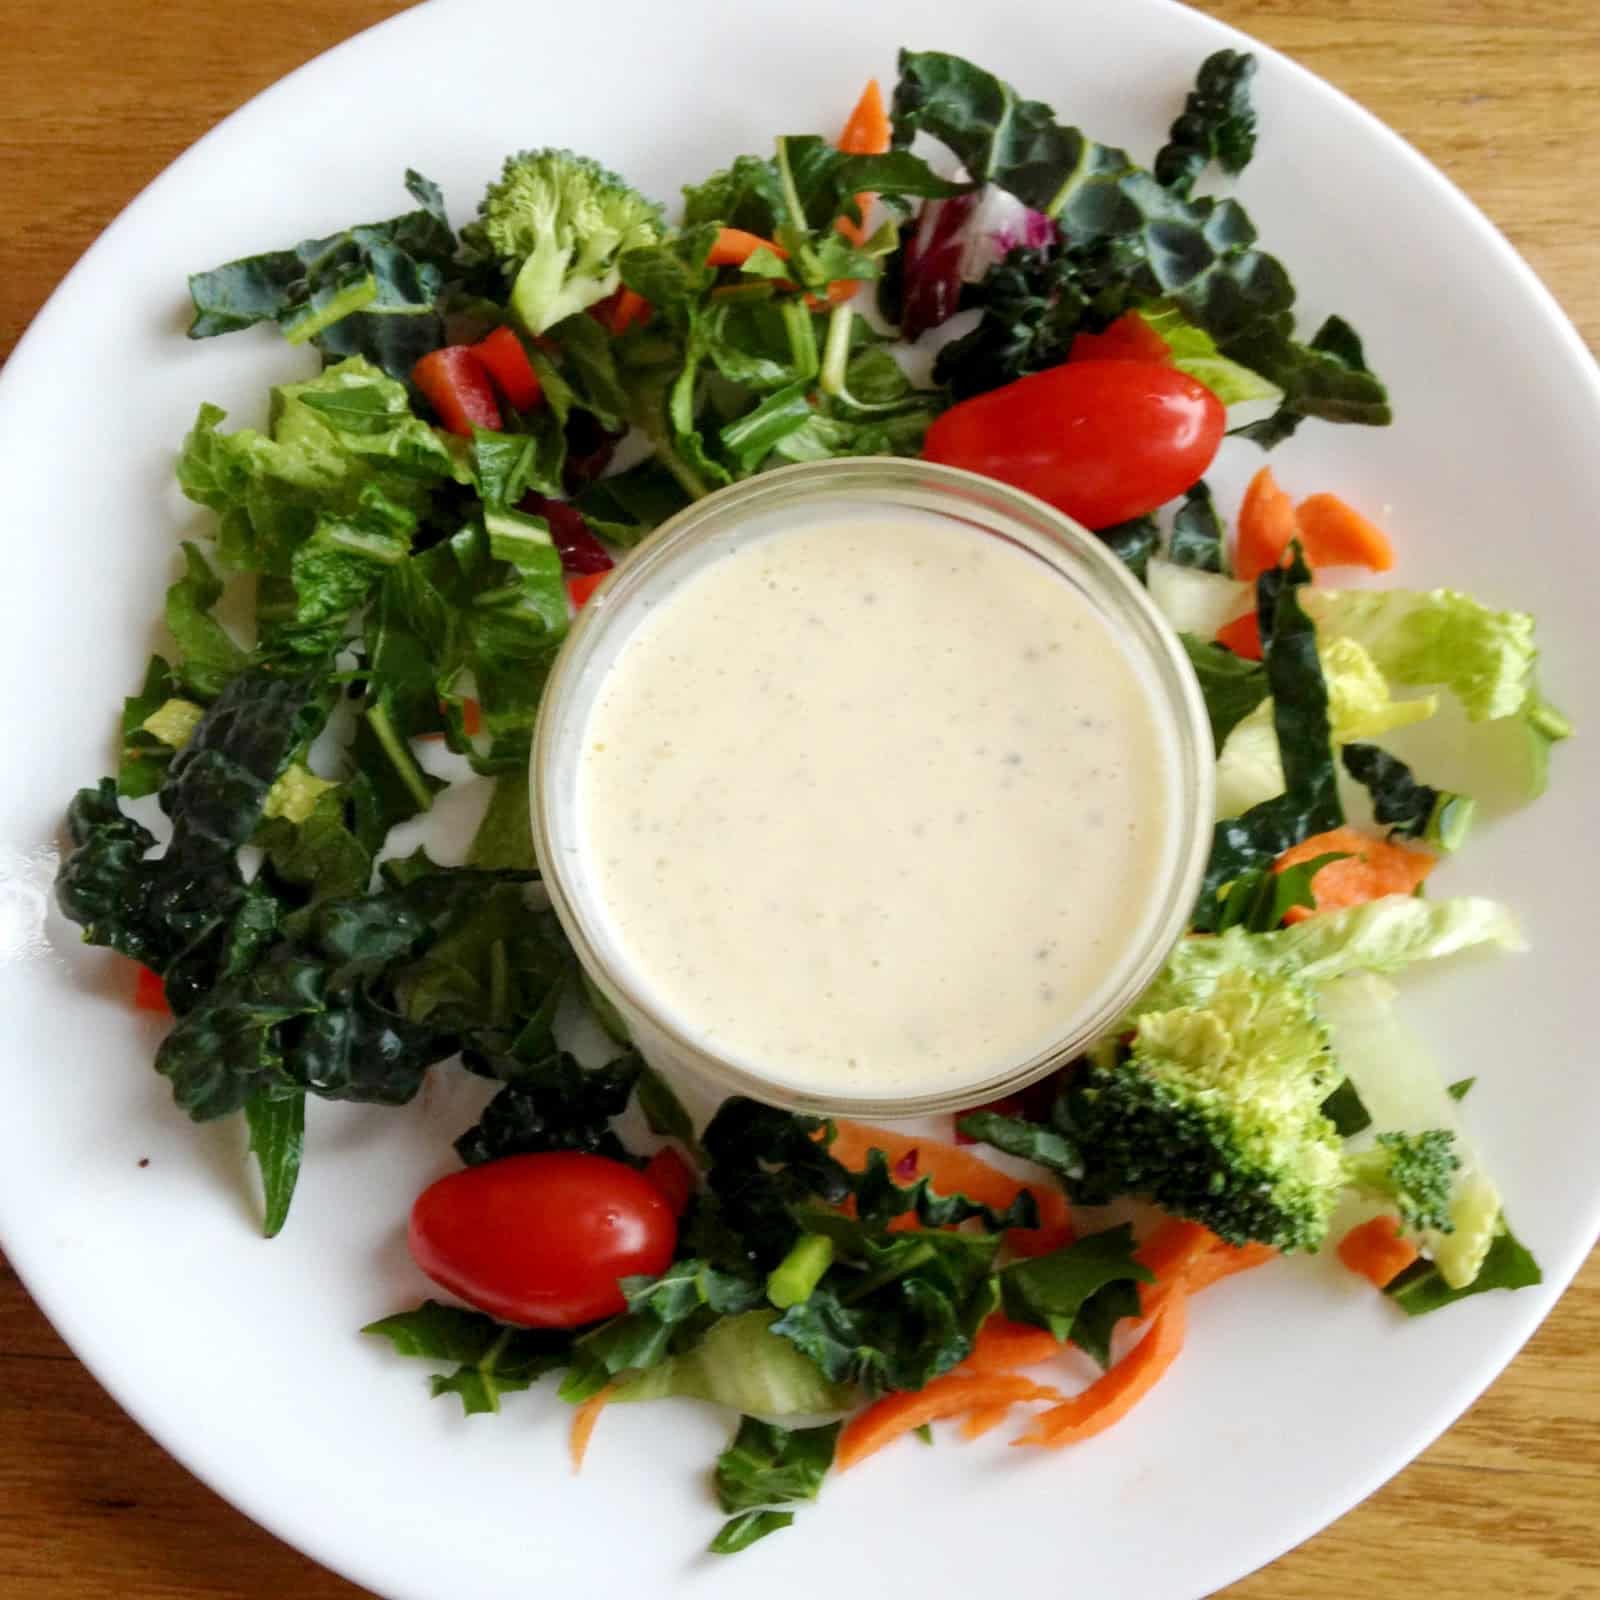 Live Right Be Healthy: Homemade Salad Dressing